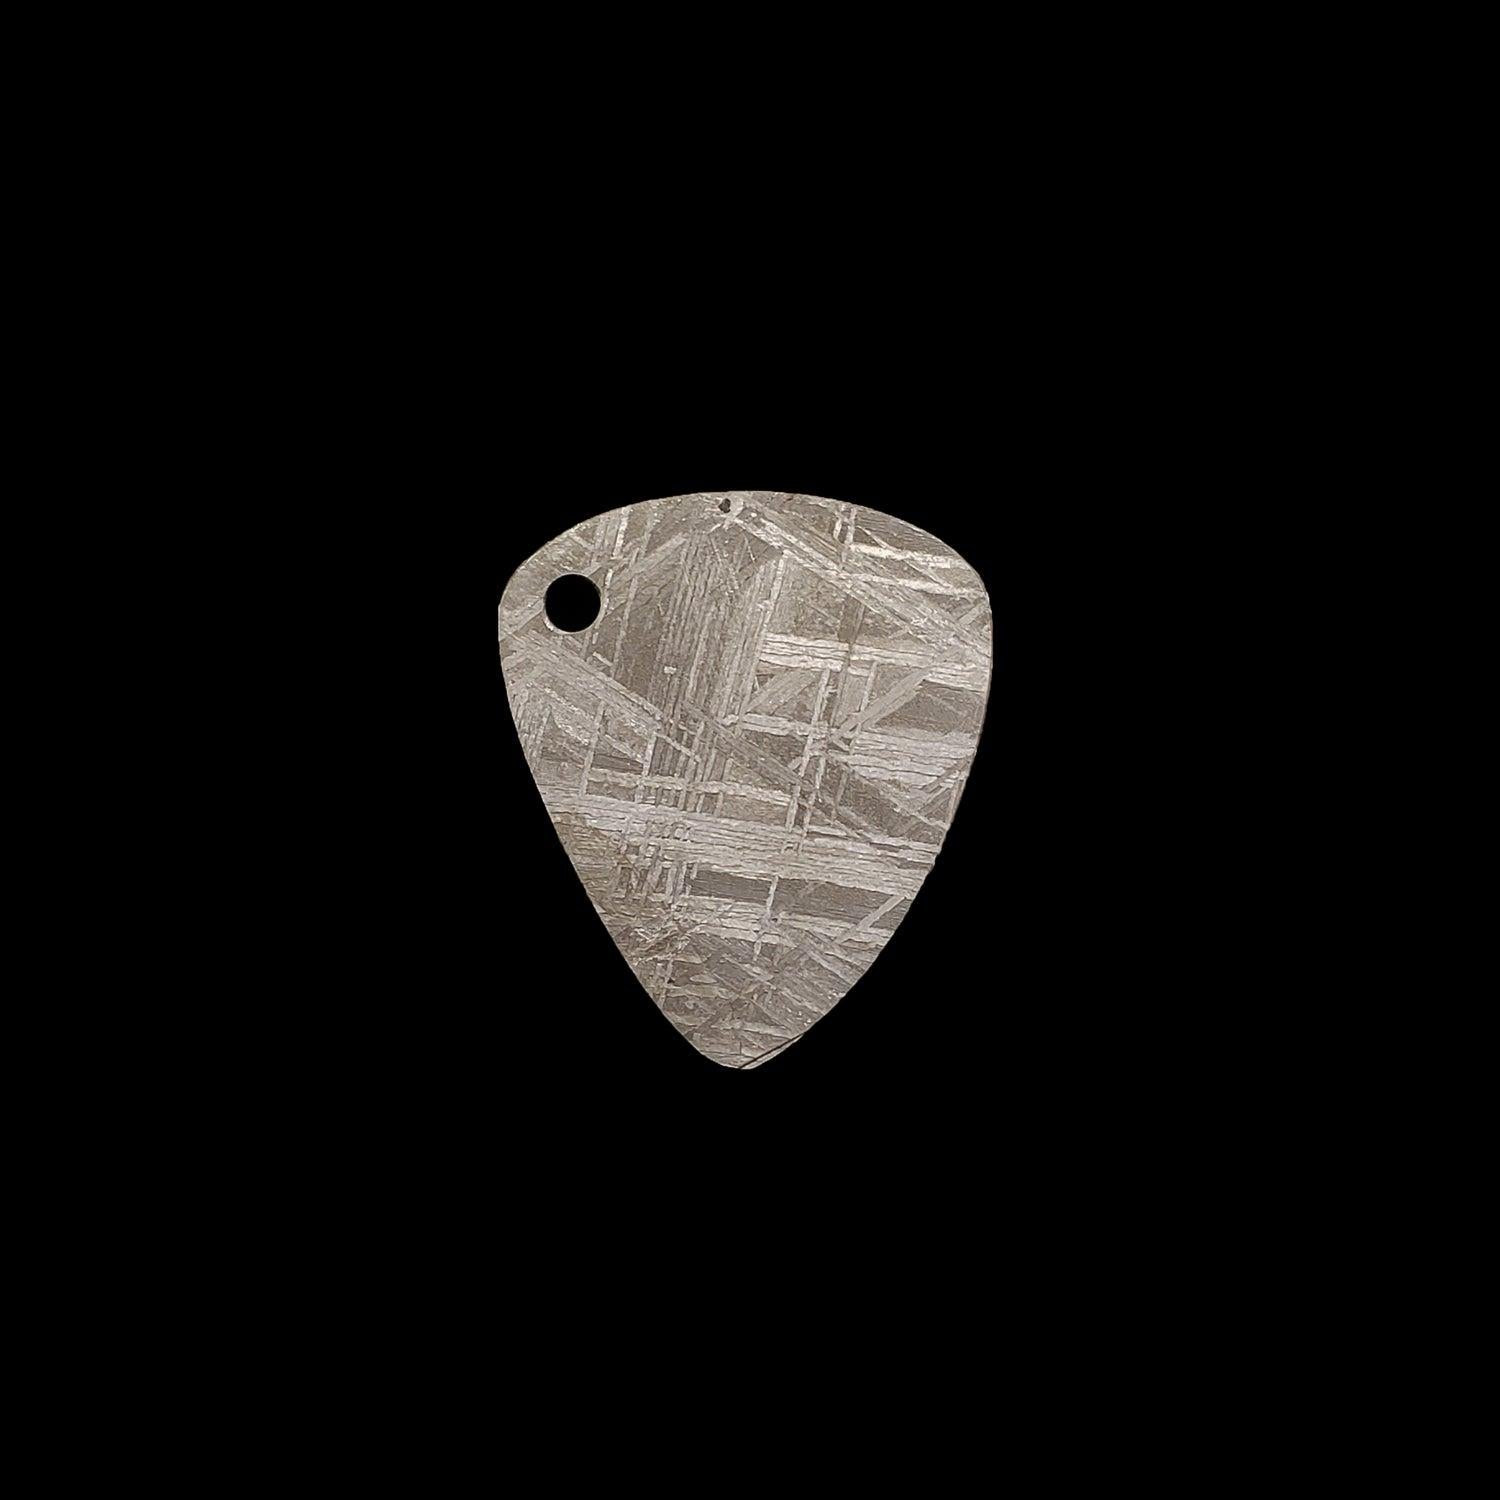 Sweden

This unique functional guitar pick fashioned from Muonionalusta meteorite can make a lovely necklace with the addition of a thin cord or silver chain. A fantastic gift for yourself or a loved one. Make the music you play truly